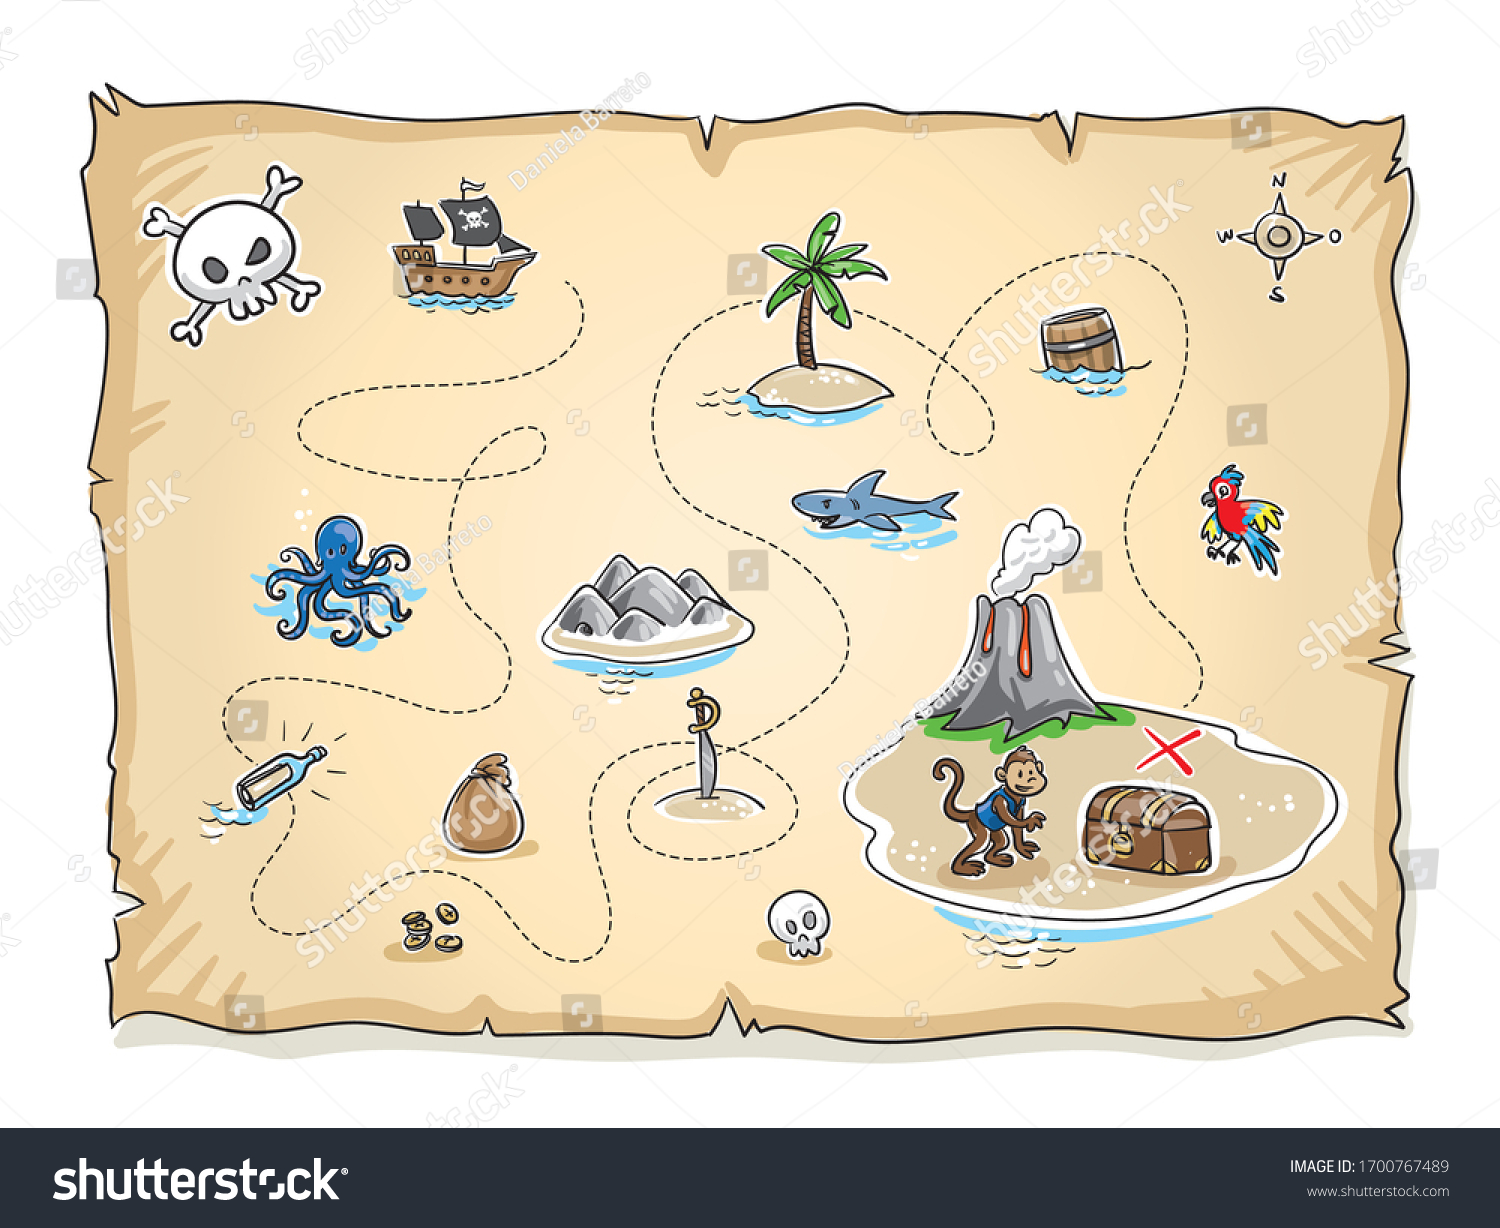 Cute pirate's treasure map with lots of icons and volcano island with treasure chest. Hand drawn cartoon sketch vector illustration, flat style coloring.  #1700767489